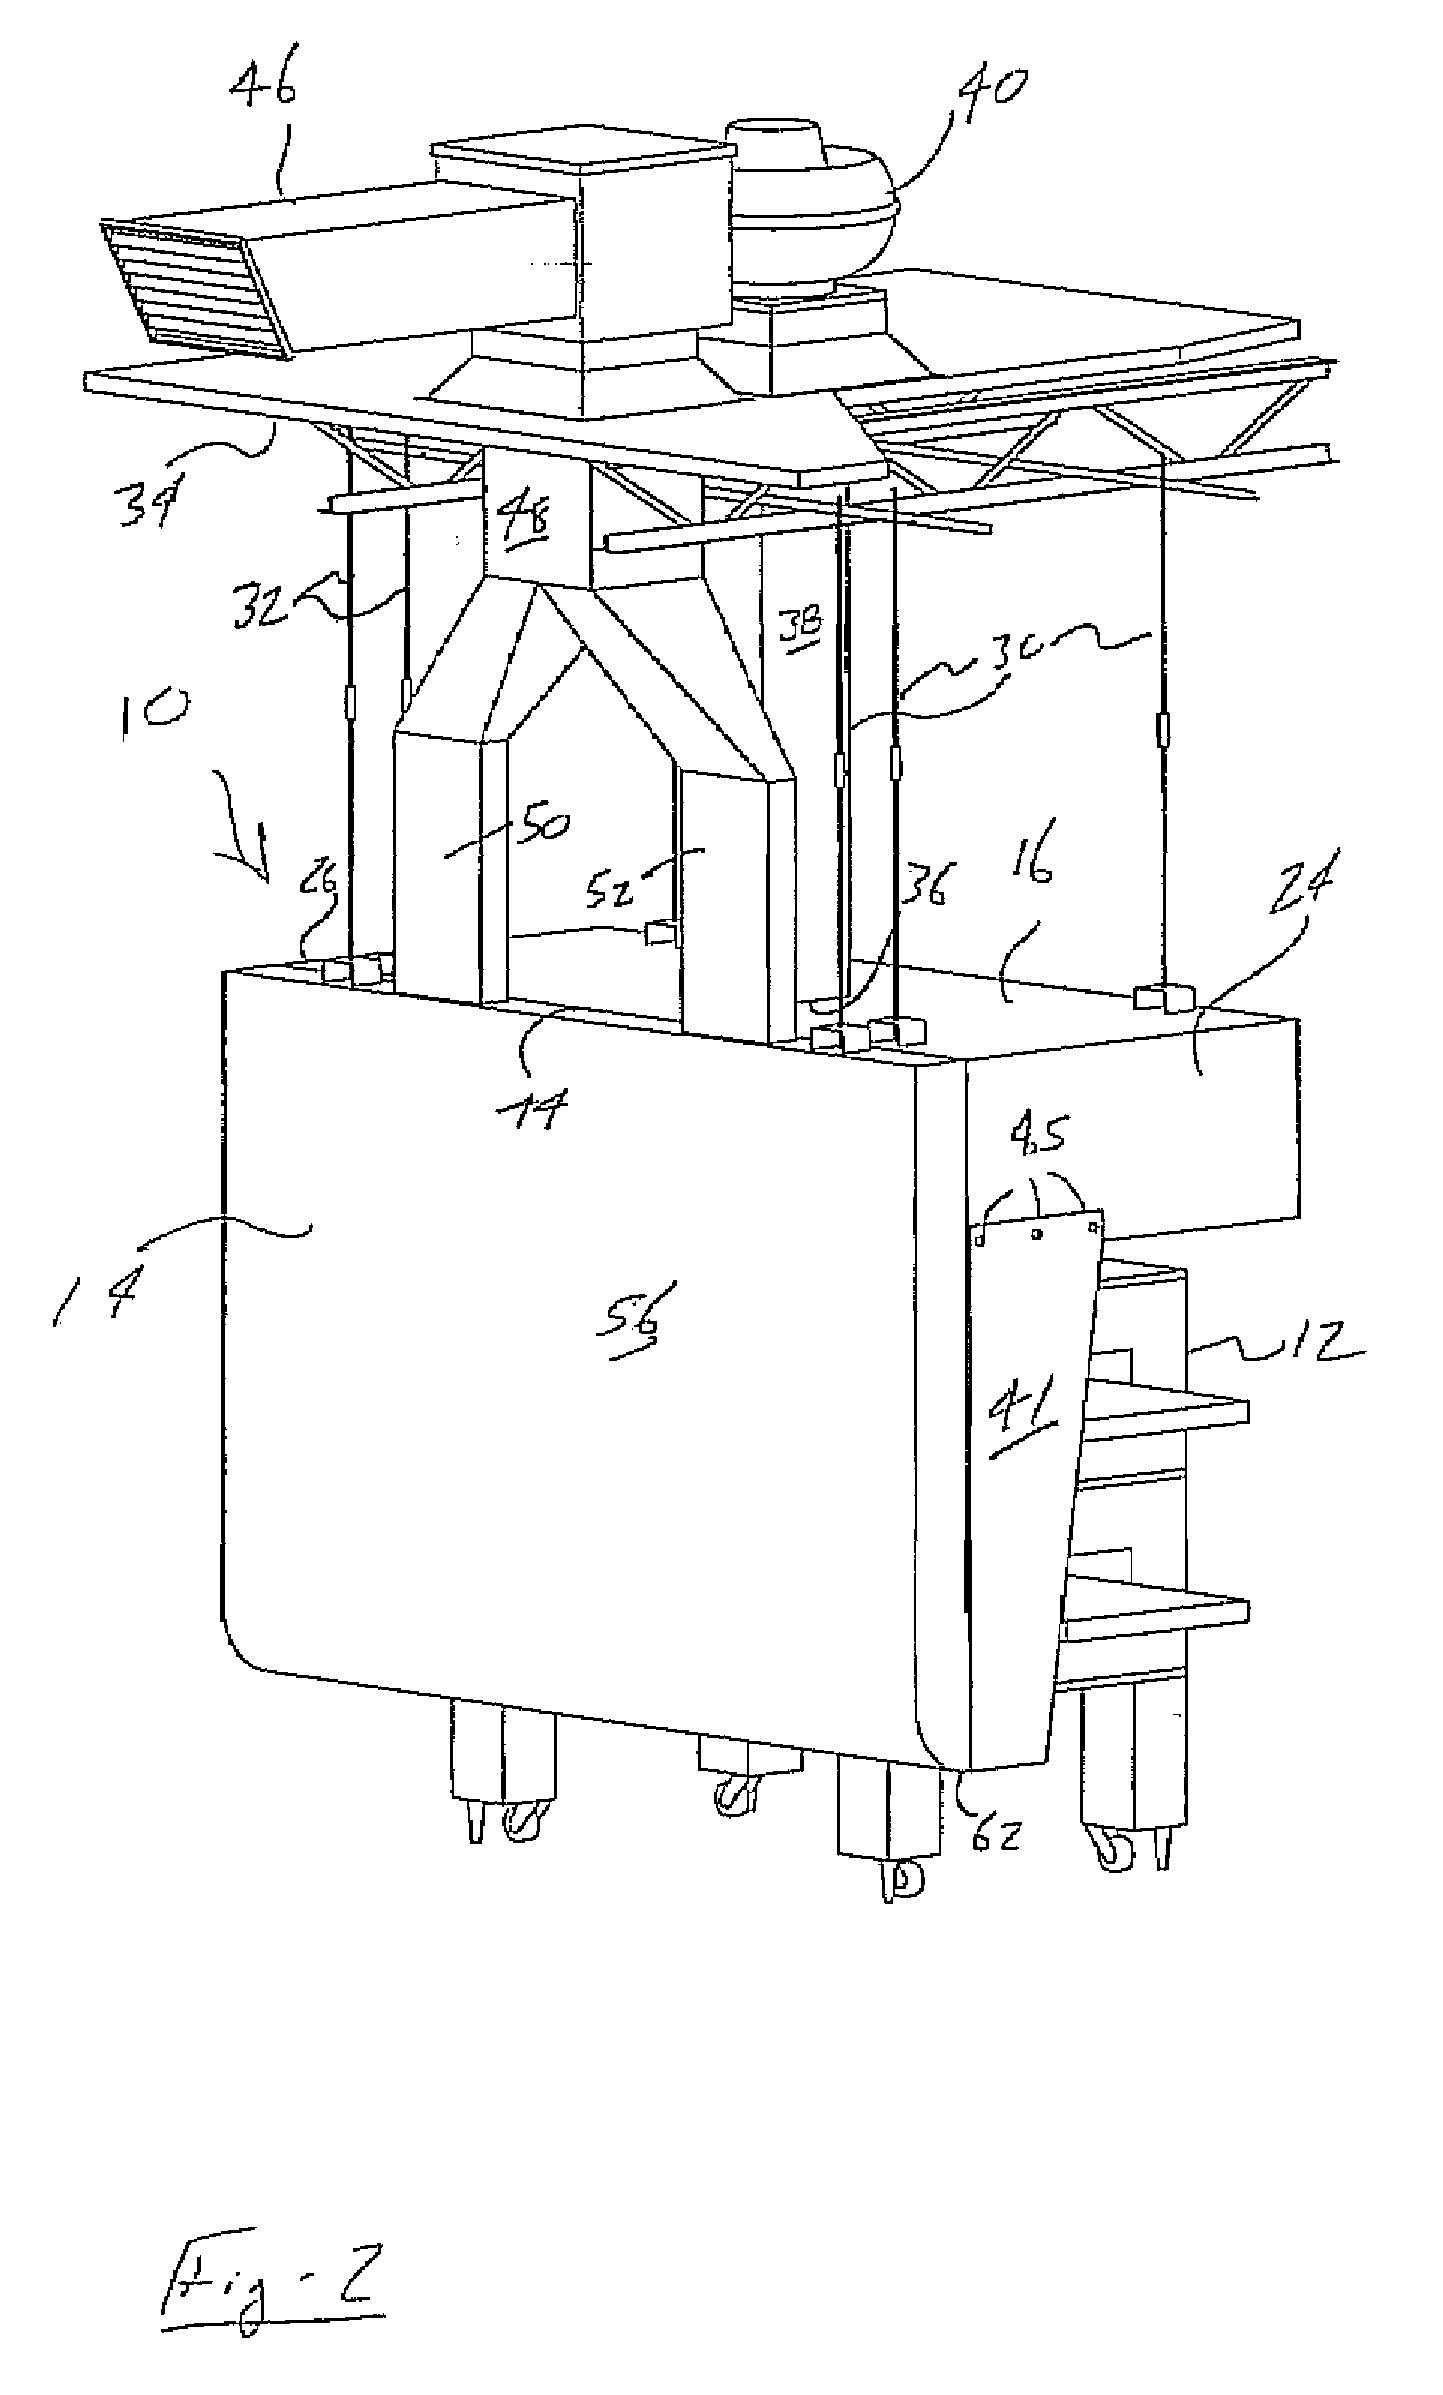 Overhead ventilation system incorporating a downwardly configured rear supply plenum with upward configured and reverse bended directional outlet